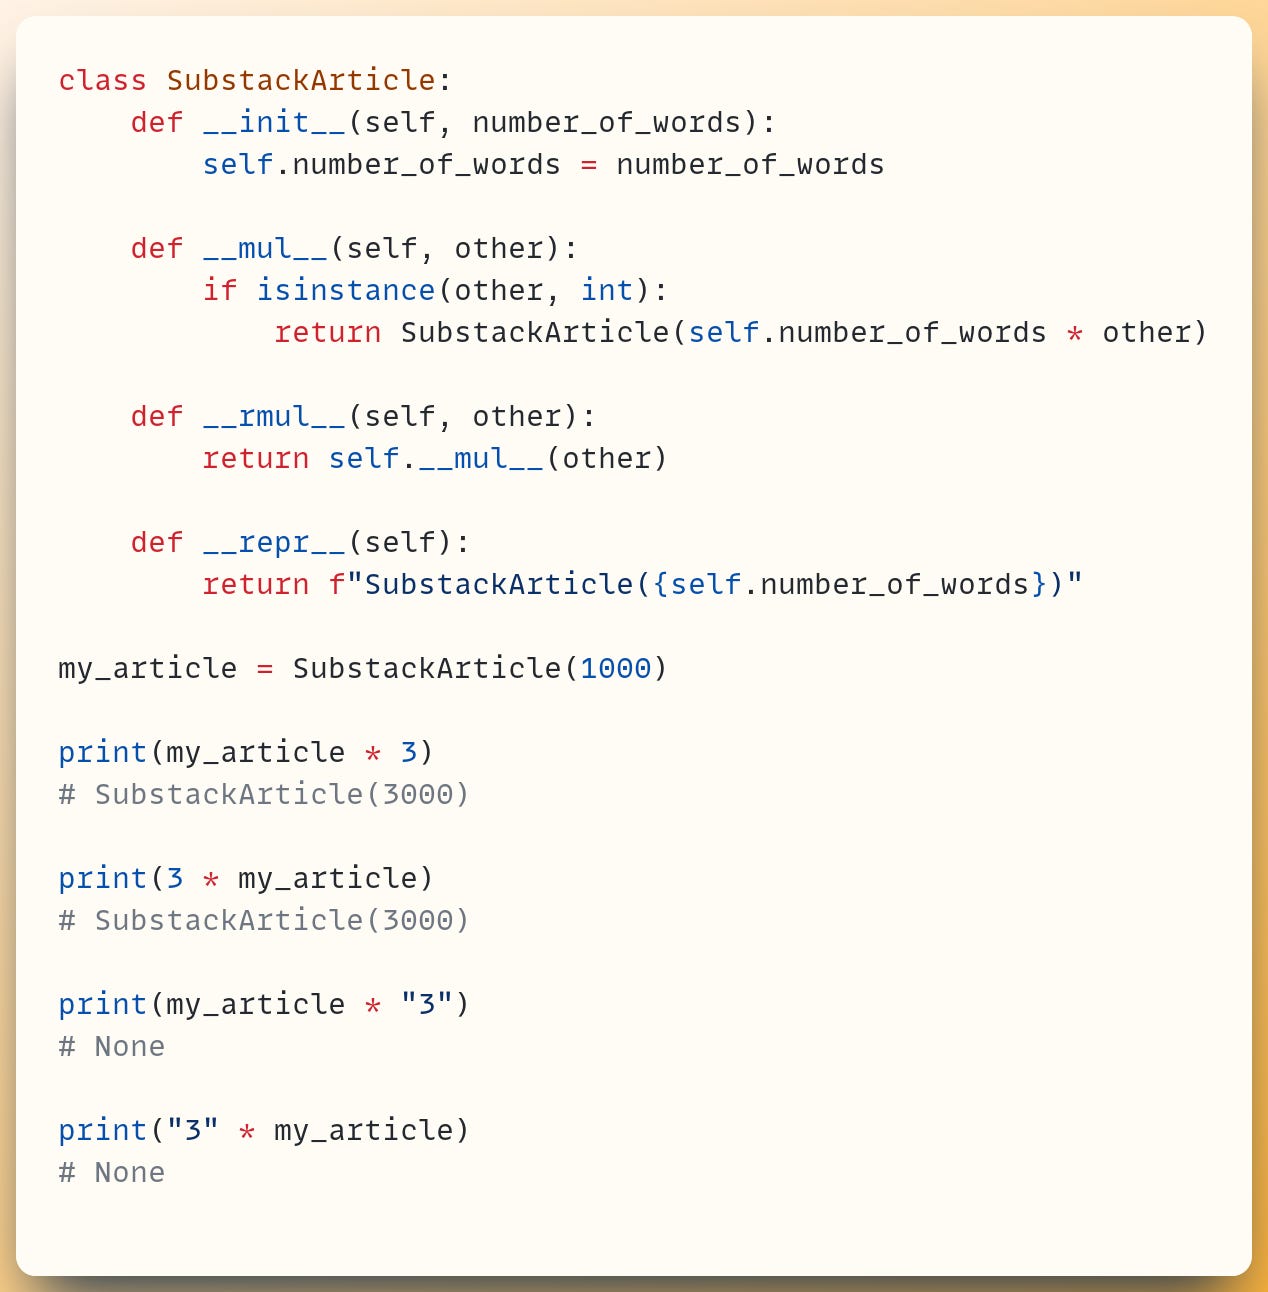 class SubstackArticle:     def __init__(self, number_of_words):         self.number_of_words = number_of_words ​     def __mul__(self, other):         if isinstance(other, int):             return SubstackArticle(self.number_of_words * other) ​     def __rmul__(self, other):         return self.__mul__(other) ​     def __repr__(self):         return f"SubstackArticle({self.number_of_words})" ​ my_article = SubstackArticle(1000) ​ print(my_article * 3) # SubstackArticle(3000) ​ print(3 * my_article) # SubstackArticle(3000) ​ print(my_article * "3") # None ​ print("3" * my_article) # None